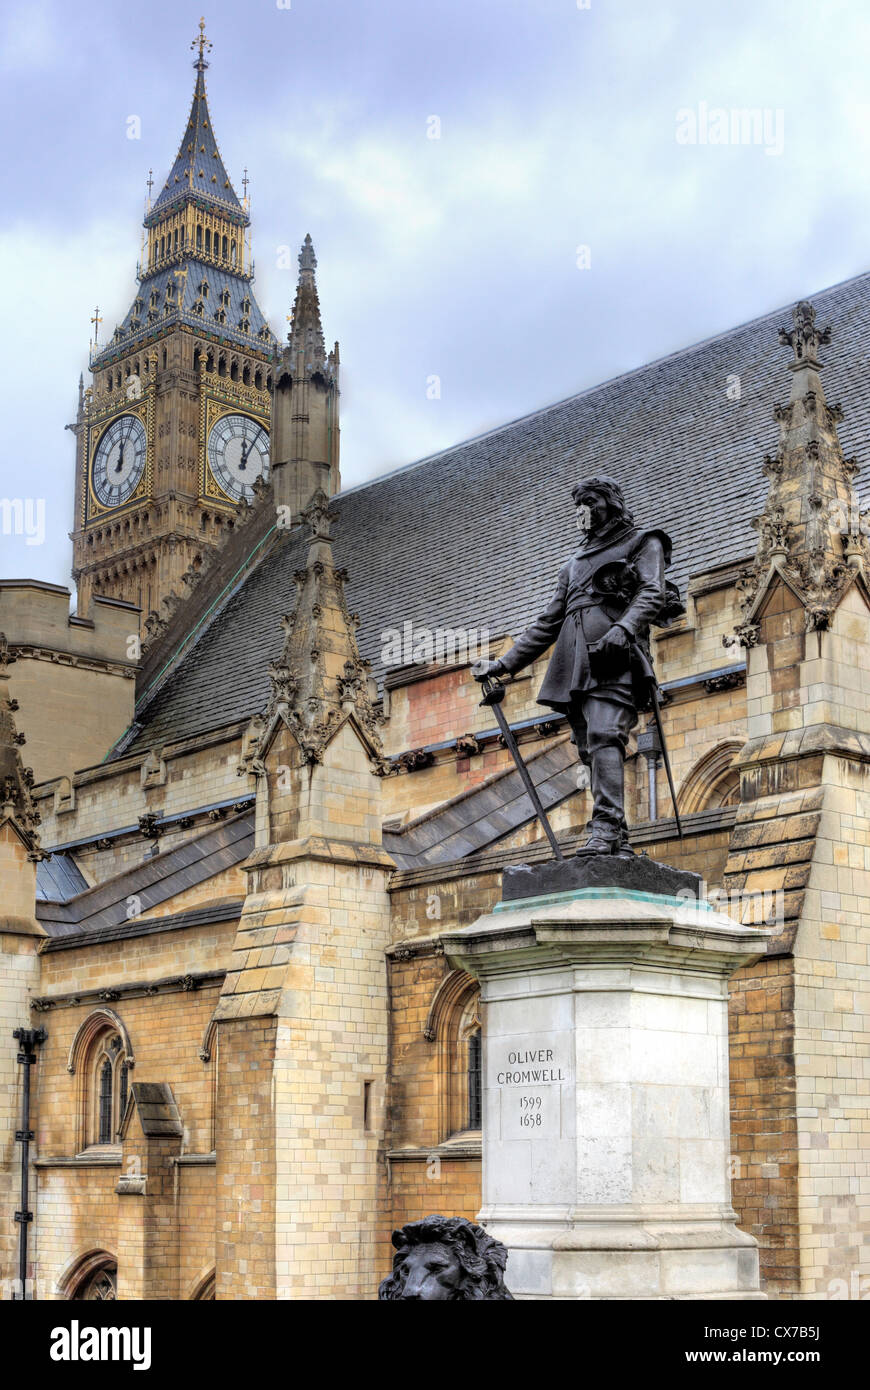 Statue of Oliver Cromwell, Old Palace Yard and the Palace of Westminster, London, UK Stock Photo